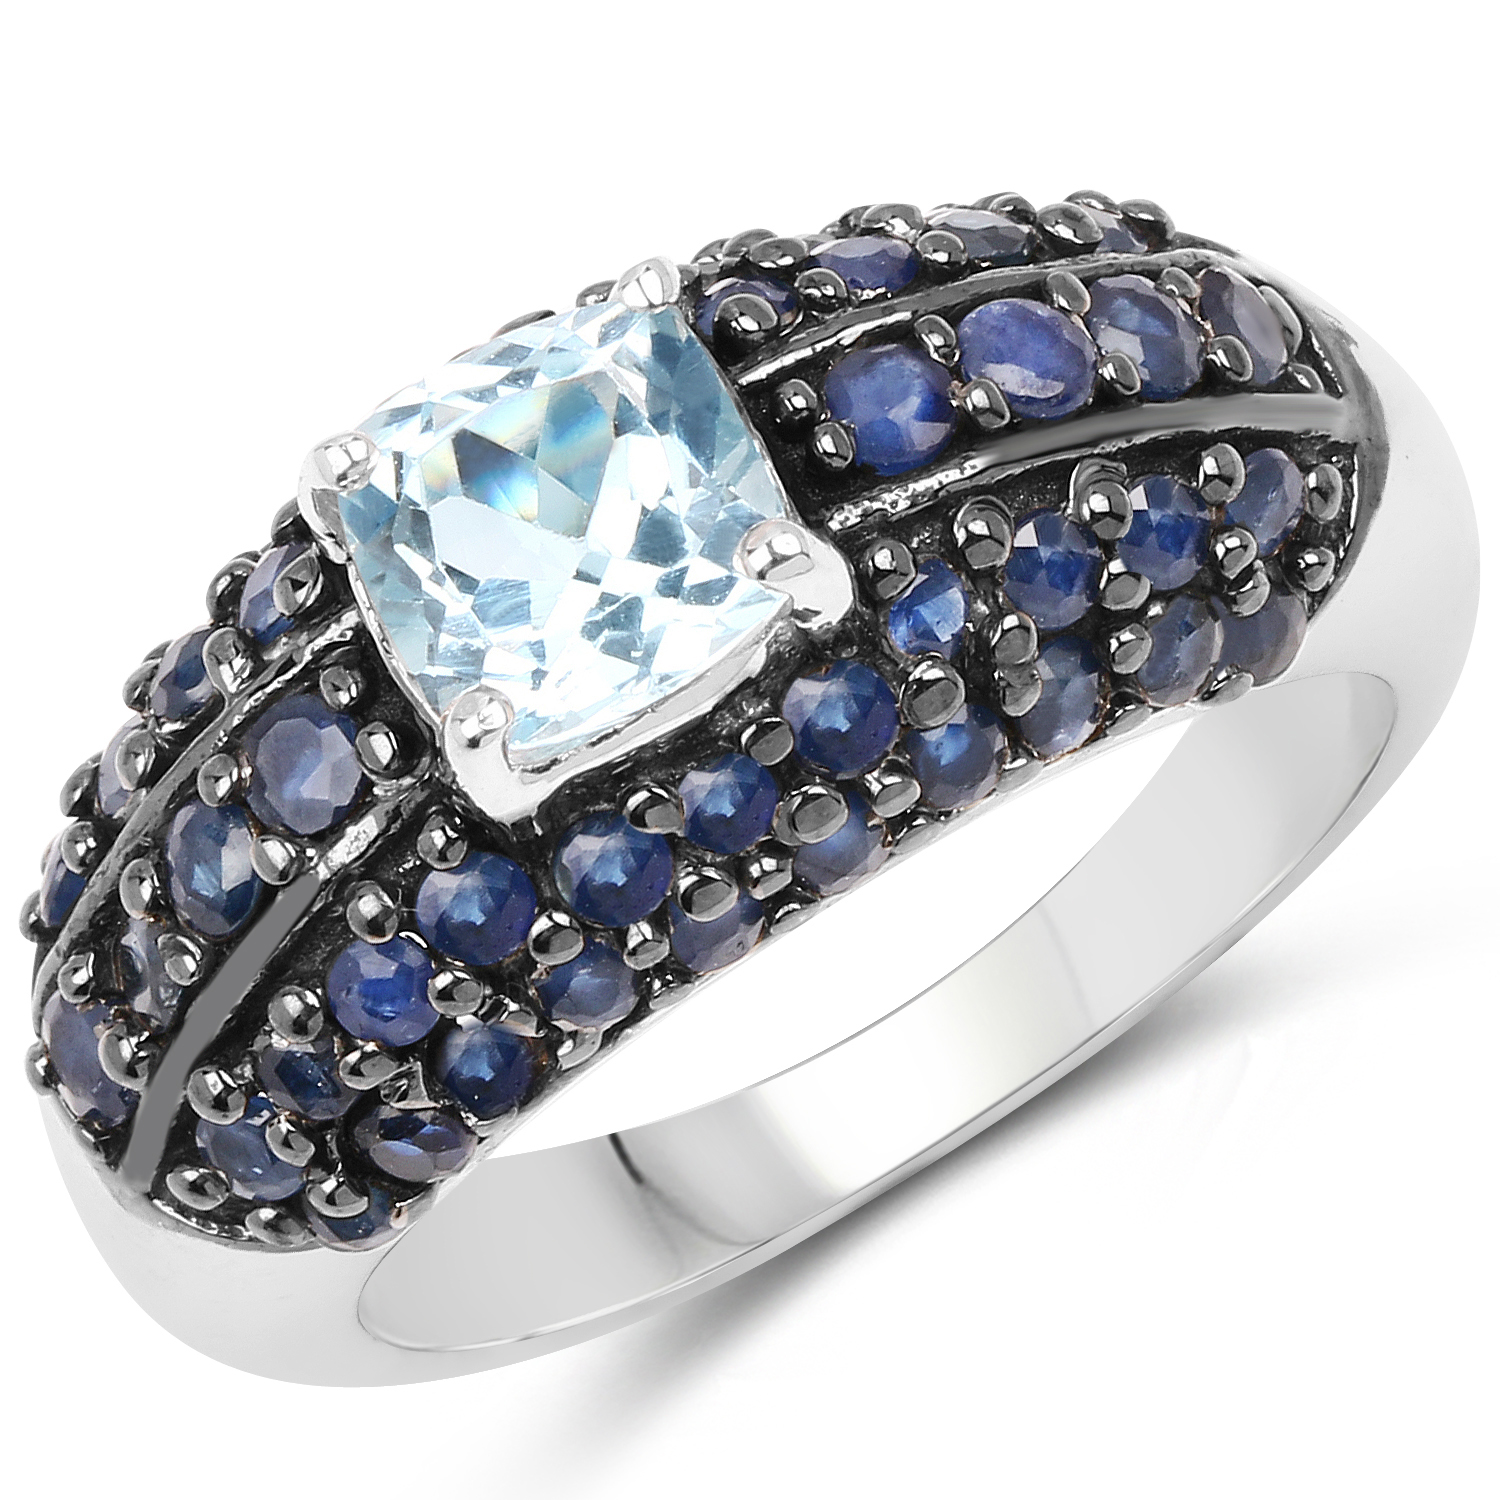 Multiple Sizes 2.78 Carat 925 Sterling Silver Genuine Blue Topaz and Tanzanite Ring 